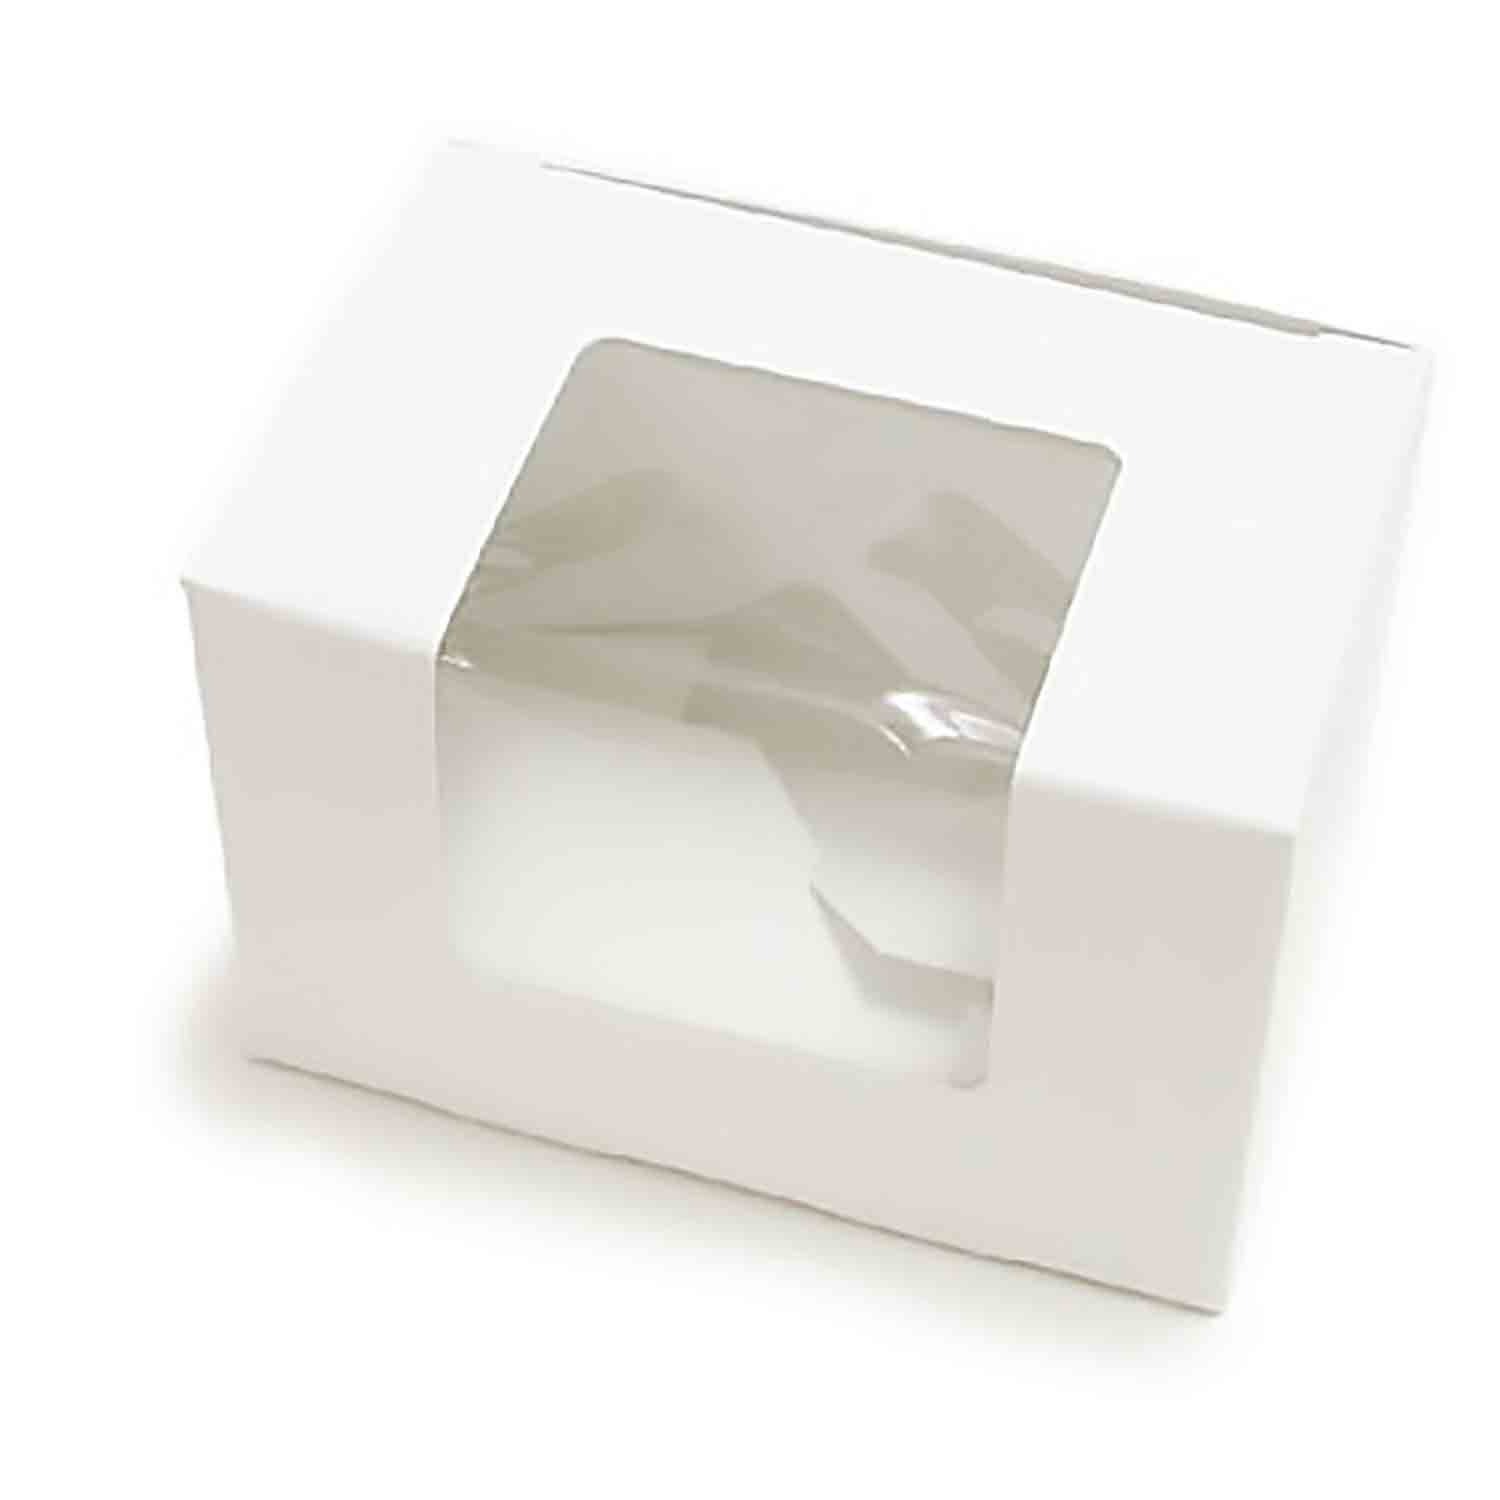 1/2 lb White Egg Candy Box with Window